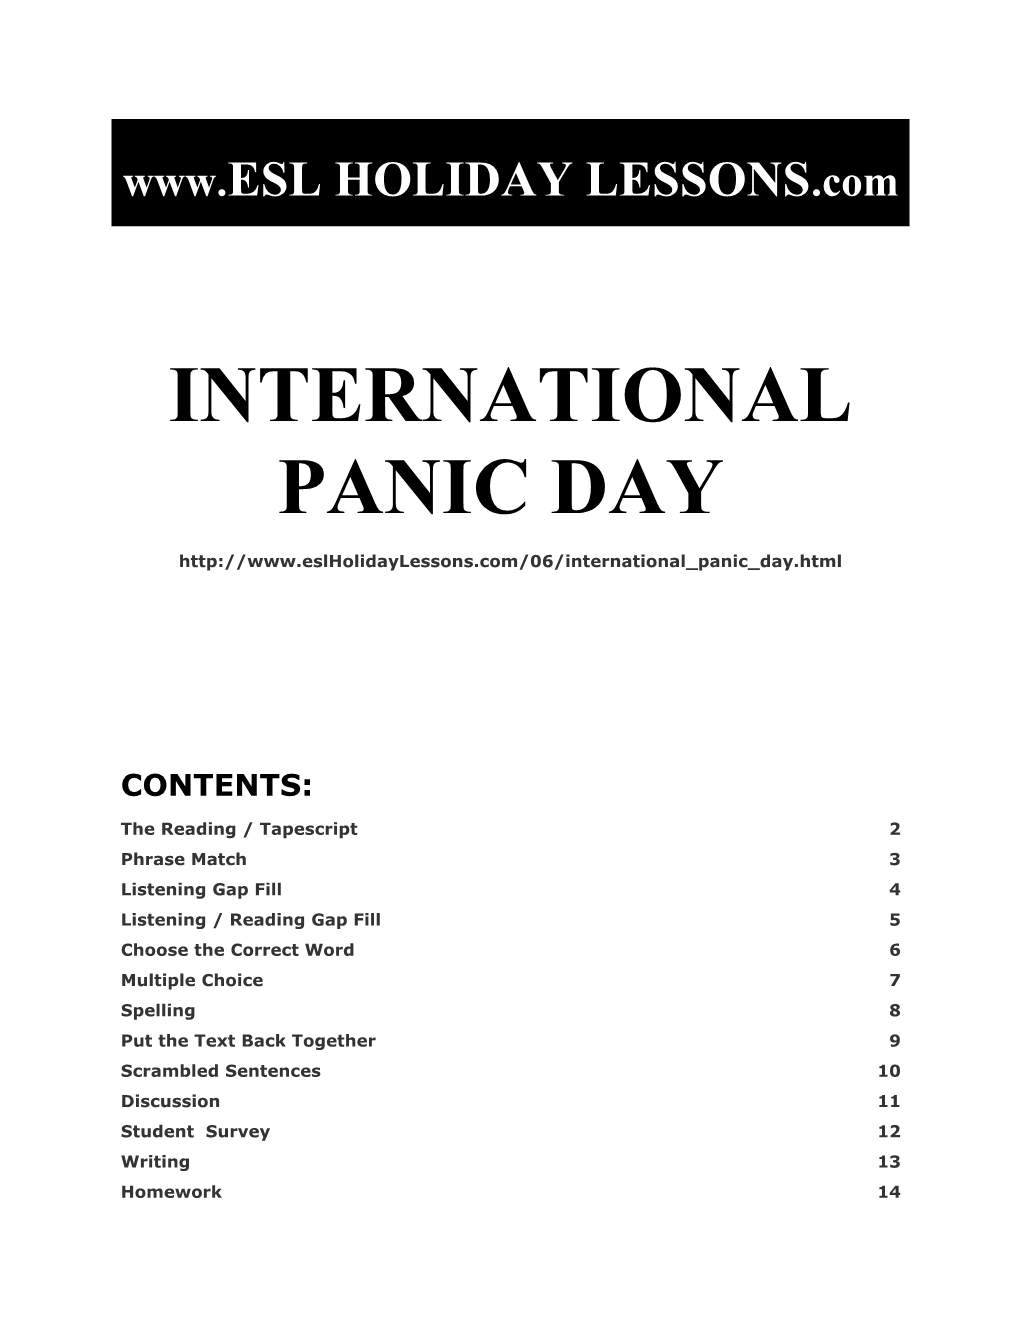 Holiday Lessons - International Panic Day